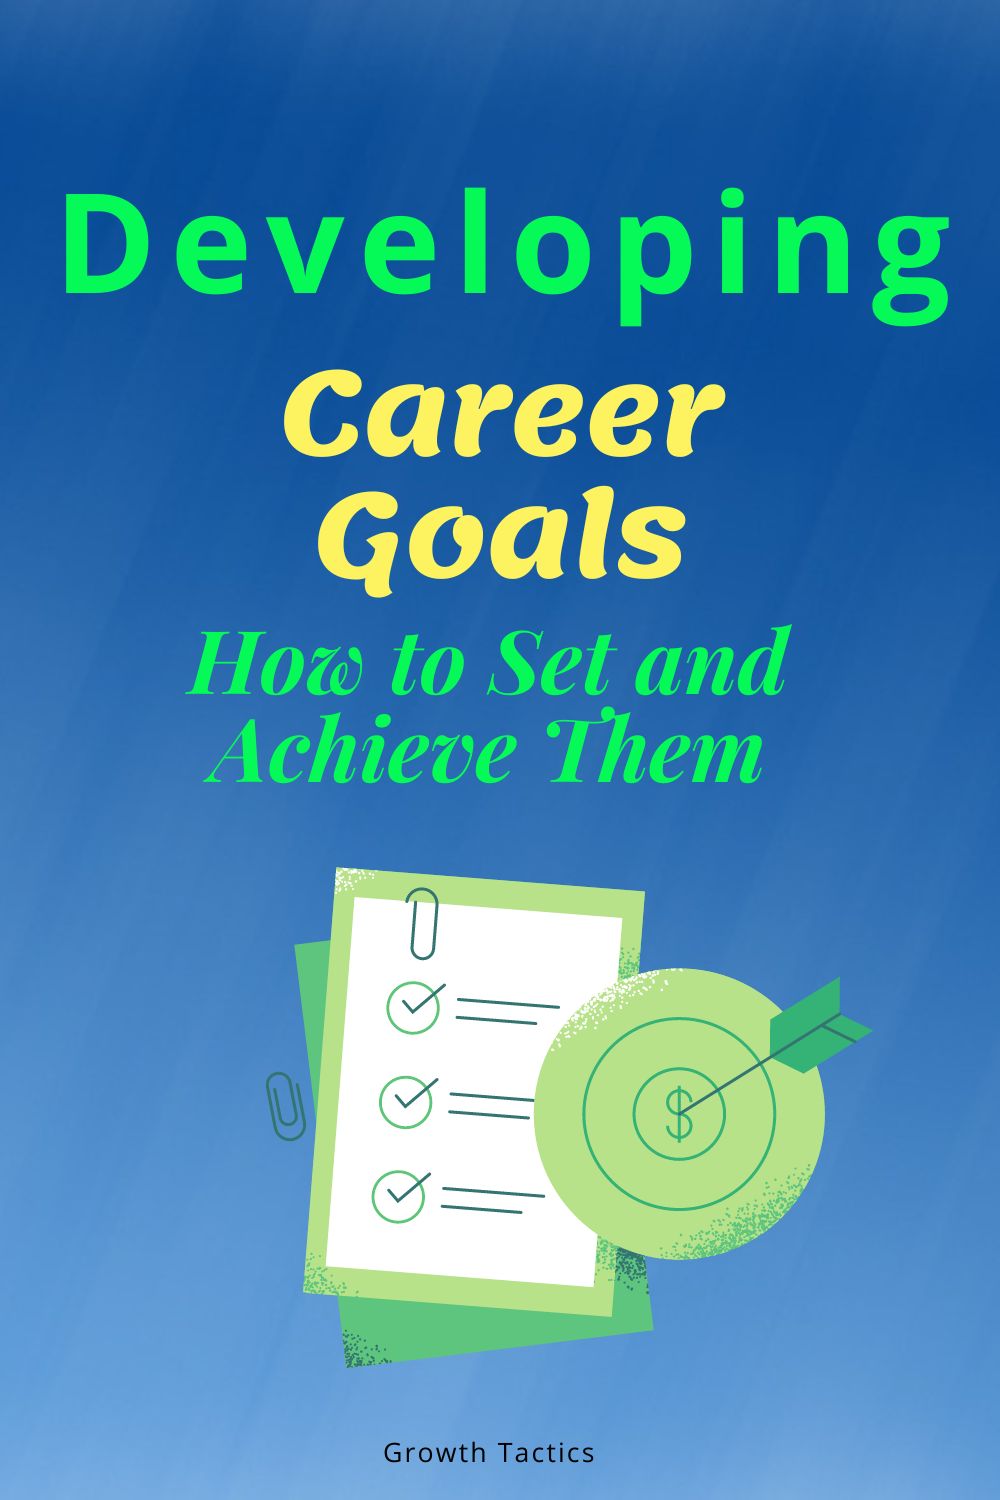 Developing Career Goals: How to Set and Achieve Them